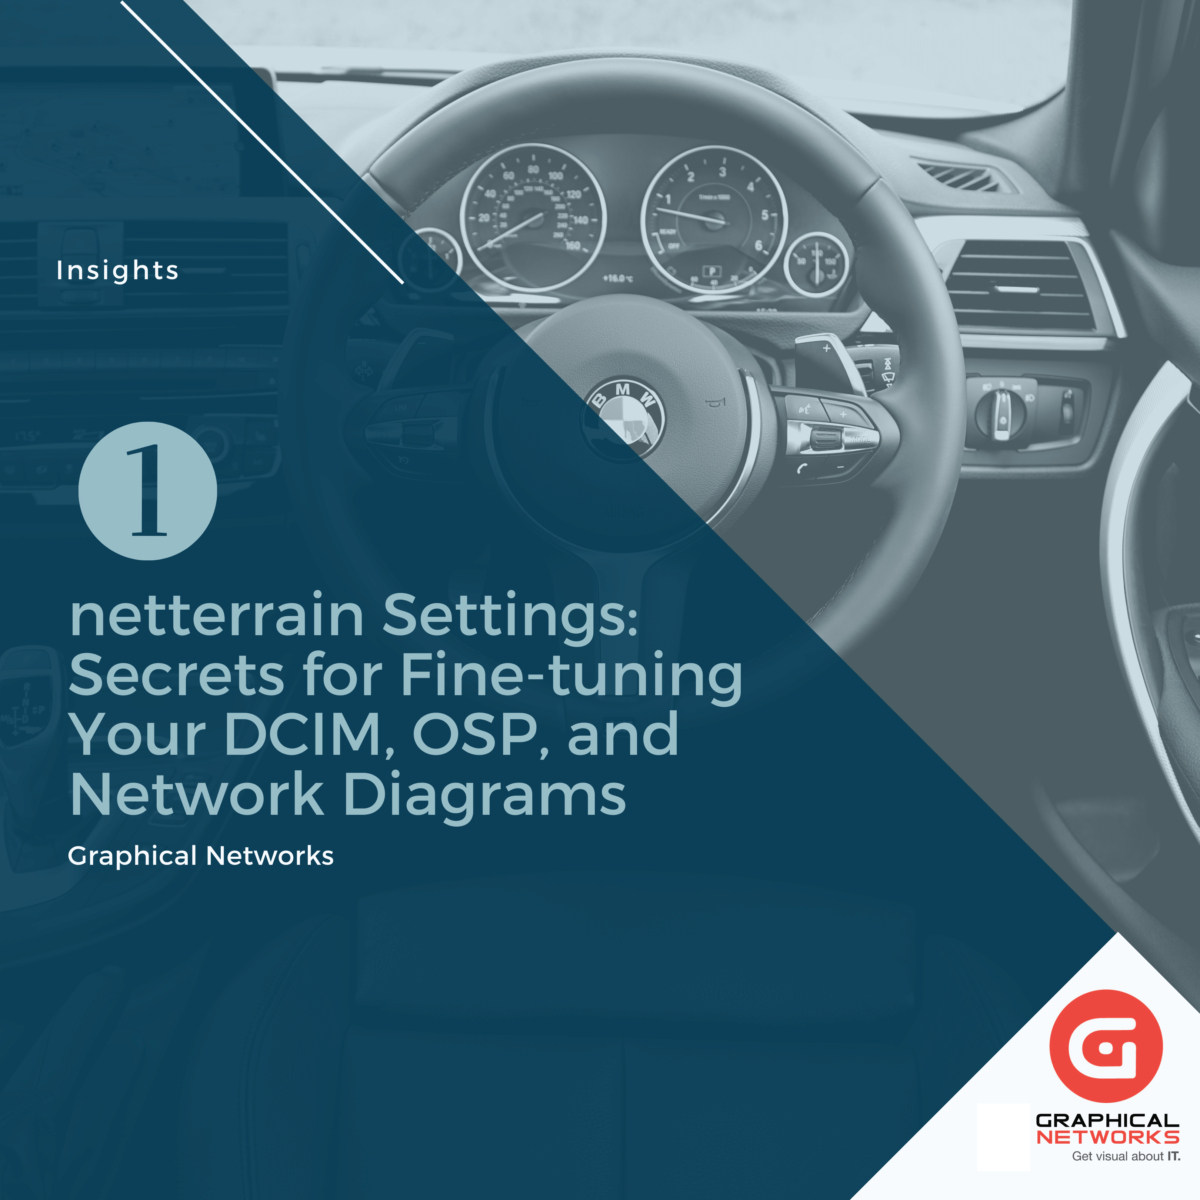 netTerrain Settings: Secrets for Fine-tuning Your DCIM, OSP, and Network Diagrams